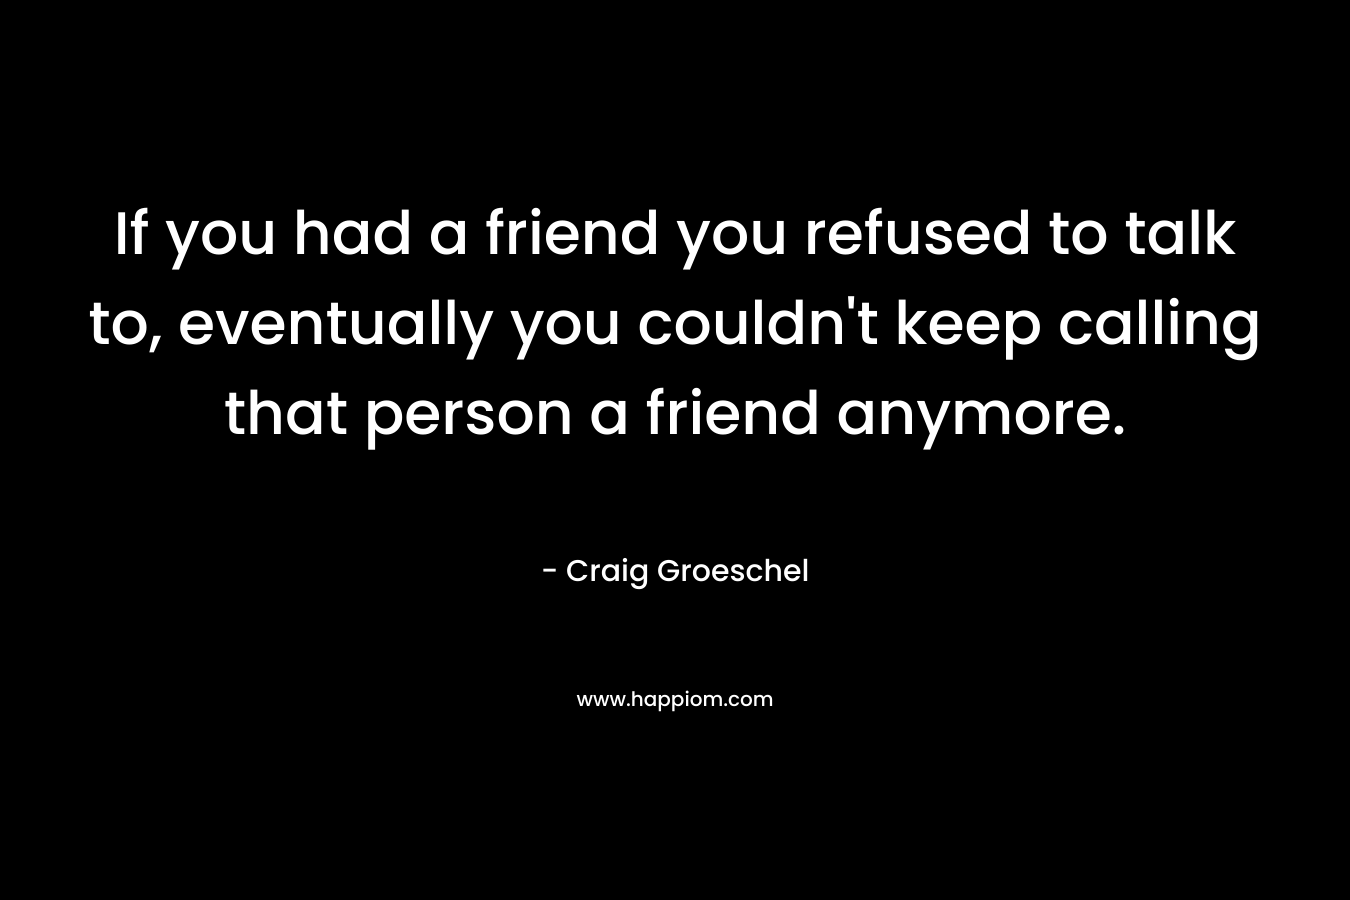 If you had a friend you refused to talk to, eventually you couldn't keep calling that person a friend anymore.